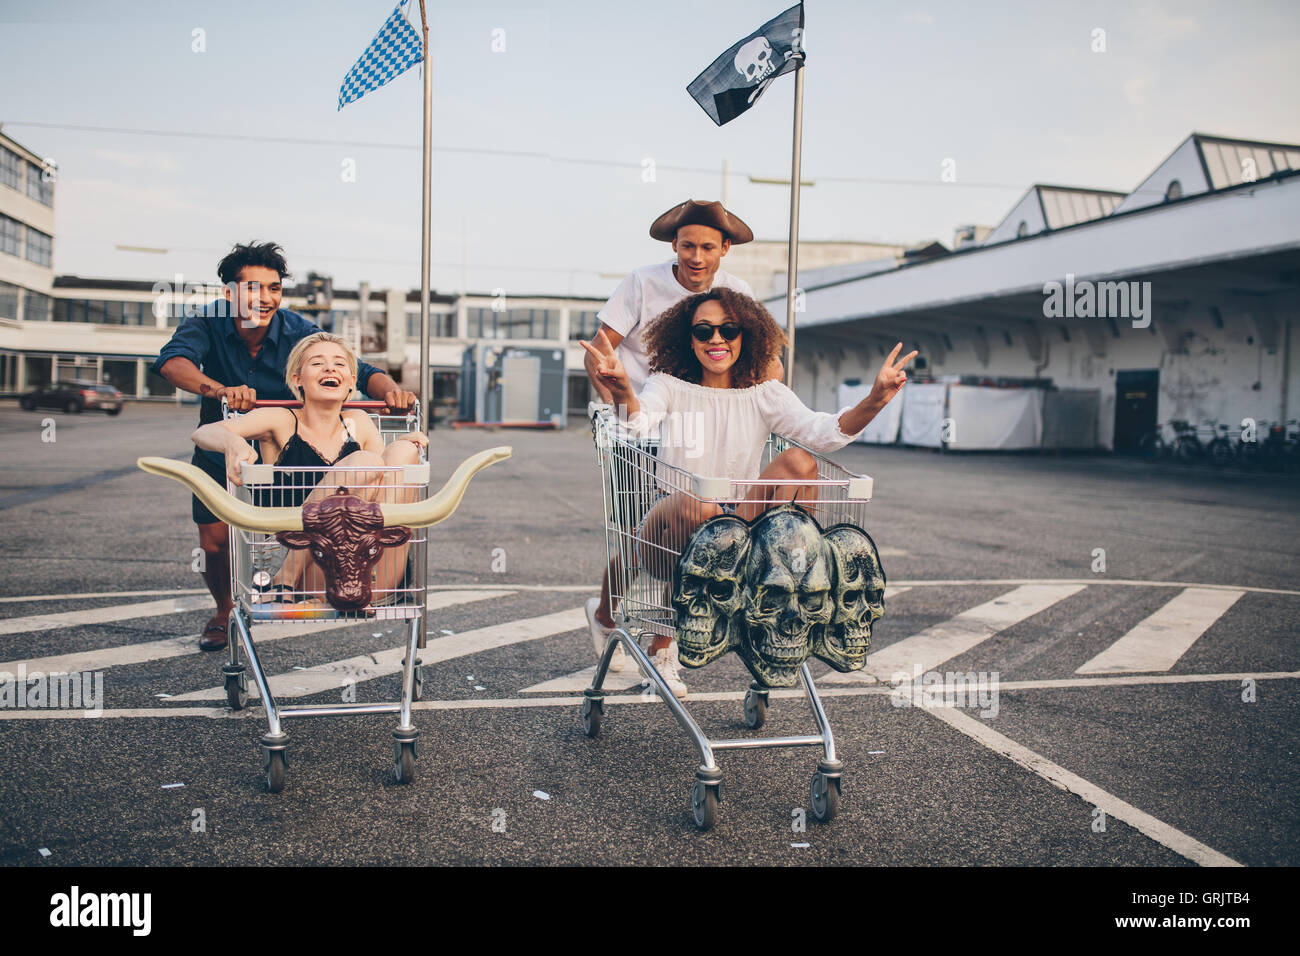 Multiracial group of friends racing with shopping cart. Young people racing with shopping trolleys on road. Stock Photo